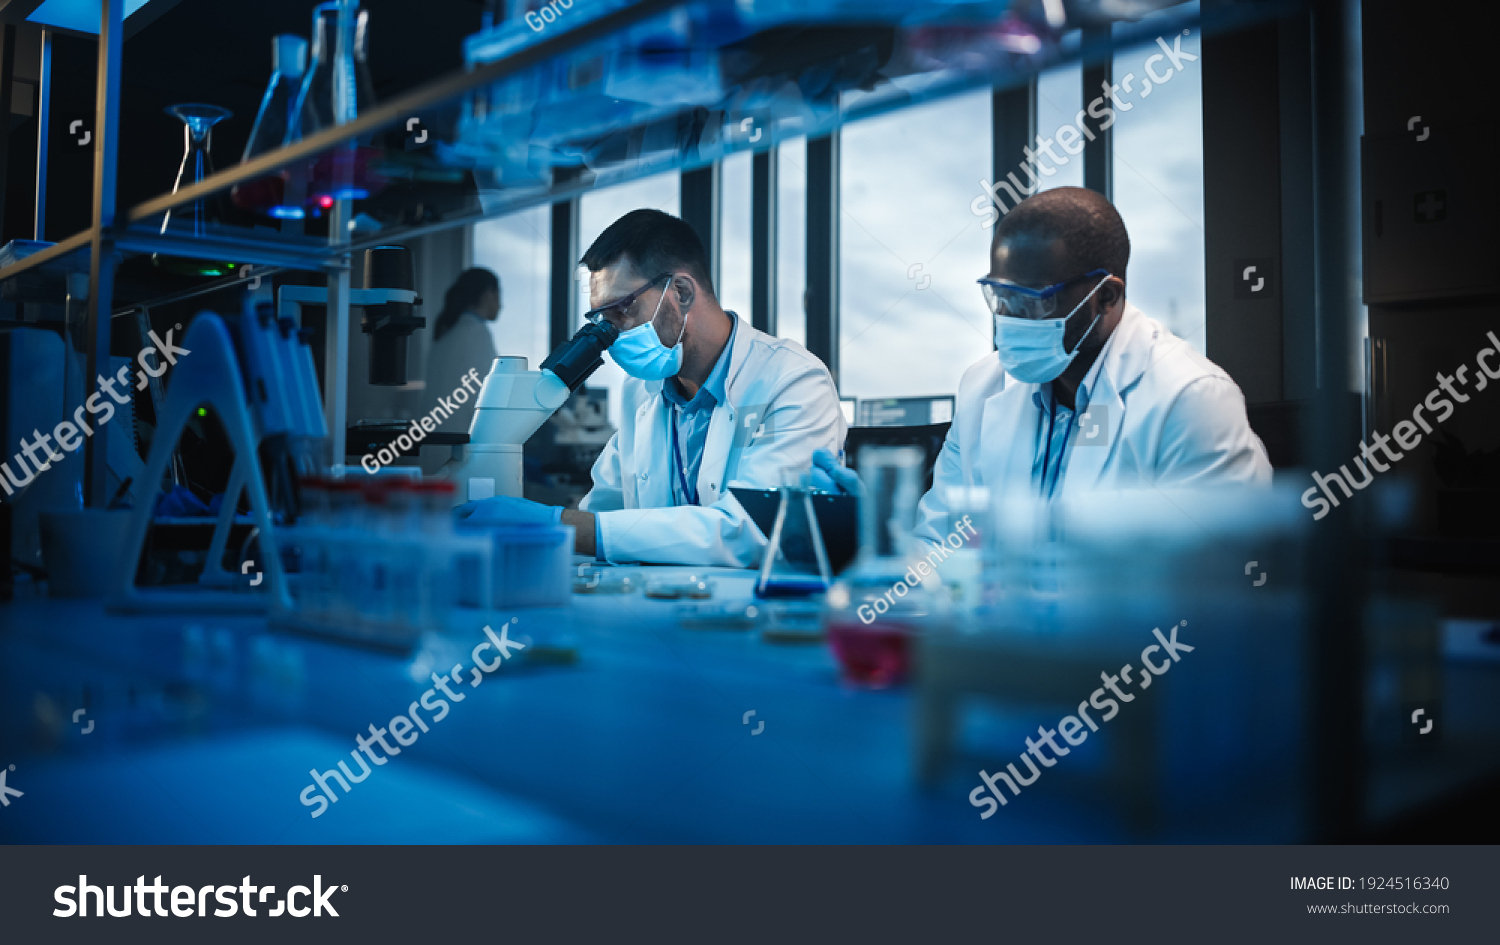 Modern Medical Research Laboratory: Two Scientists Wearing Face Masks use Microscope, Analyse Sample in Petri Dish, Talk. Advanced Scientific Lab for Medicine, Biotechnology. Blue Color #1924516340